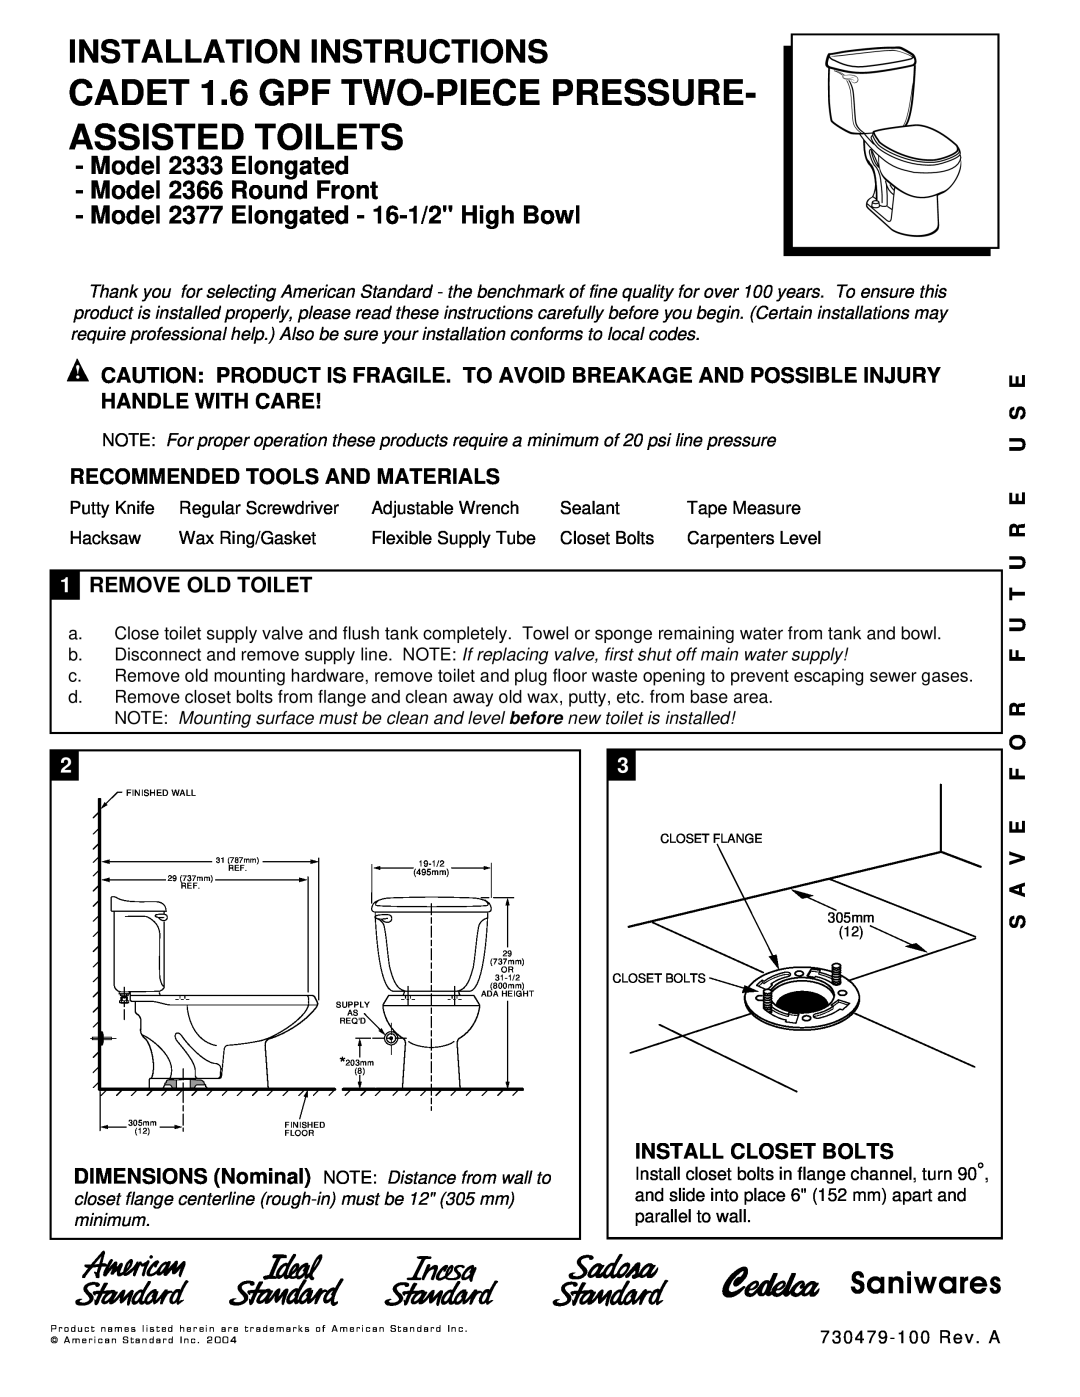 American Standard 2366 installation instructions Recommended Tools And Materials, 1REMOVE OLD TOILET, S A V E F, Saniwares 